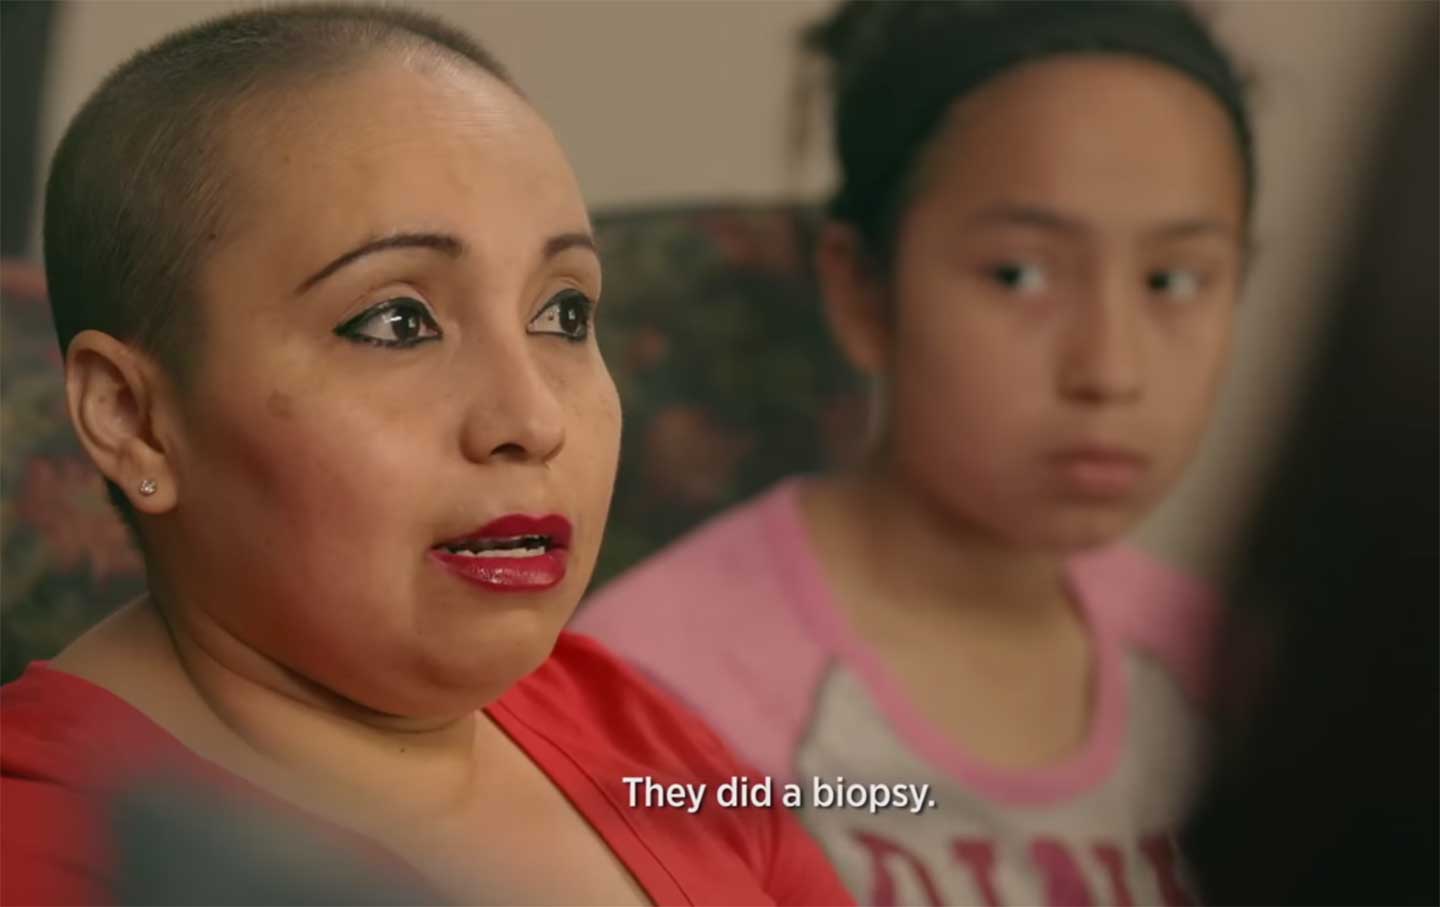 This Mother Has Breast Cancer and Knows She Needs Treatment. Why Can’t She Get It?